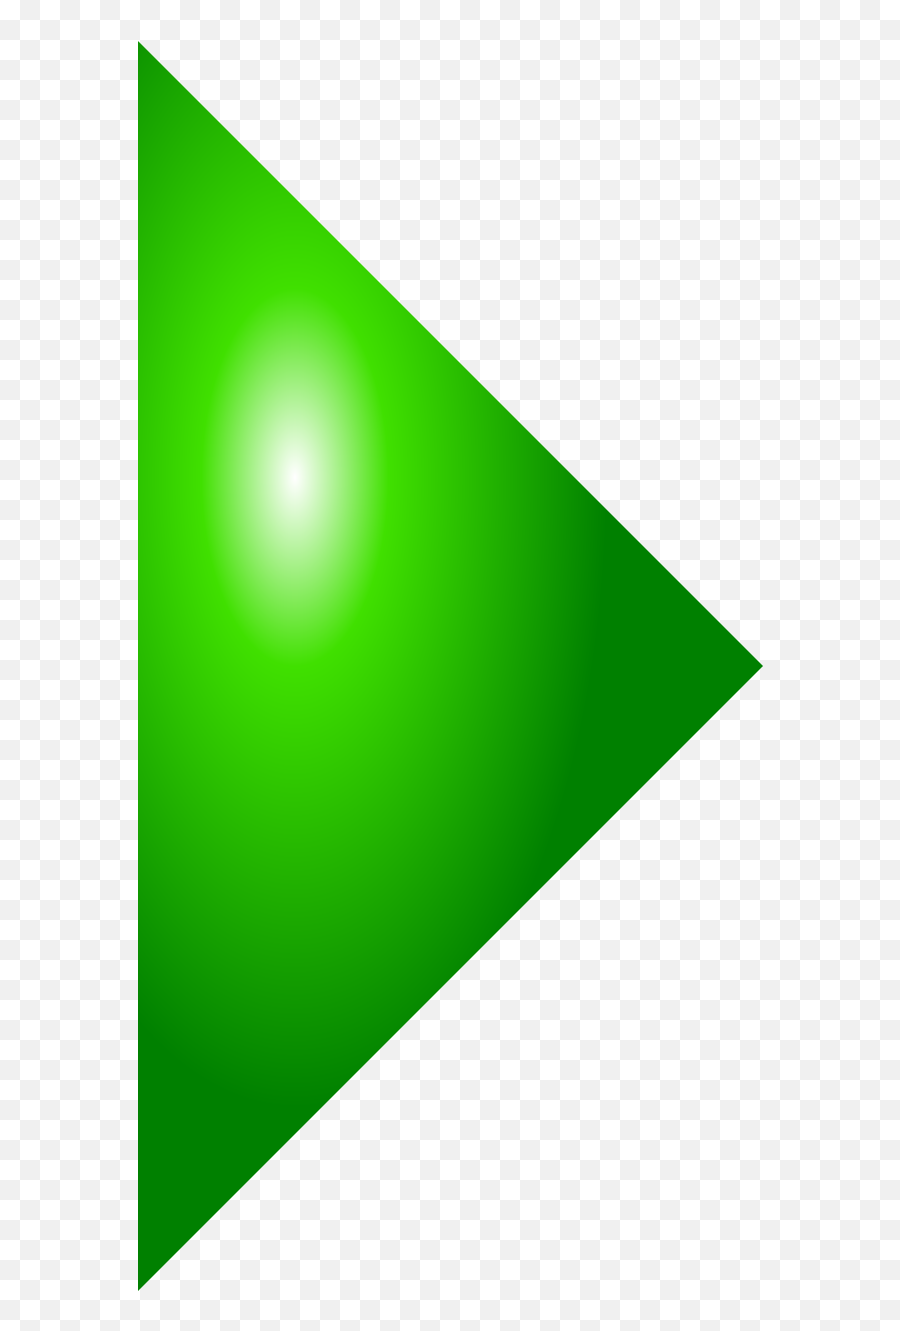 Green Arrow Png - Filevector Right Arrow Changed Green Parallel,Right Arrow Png